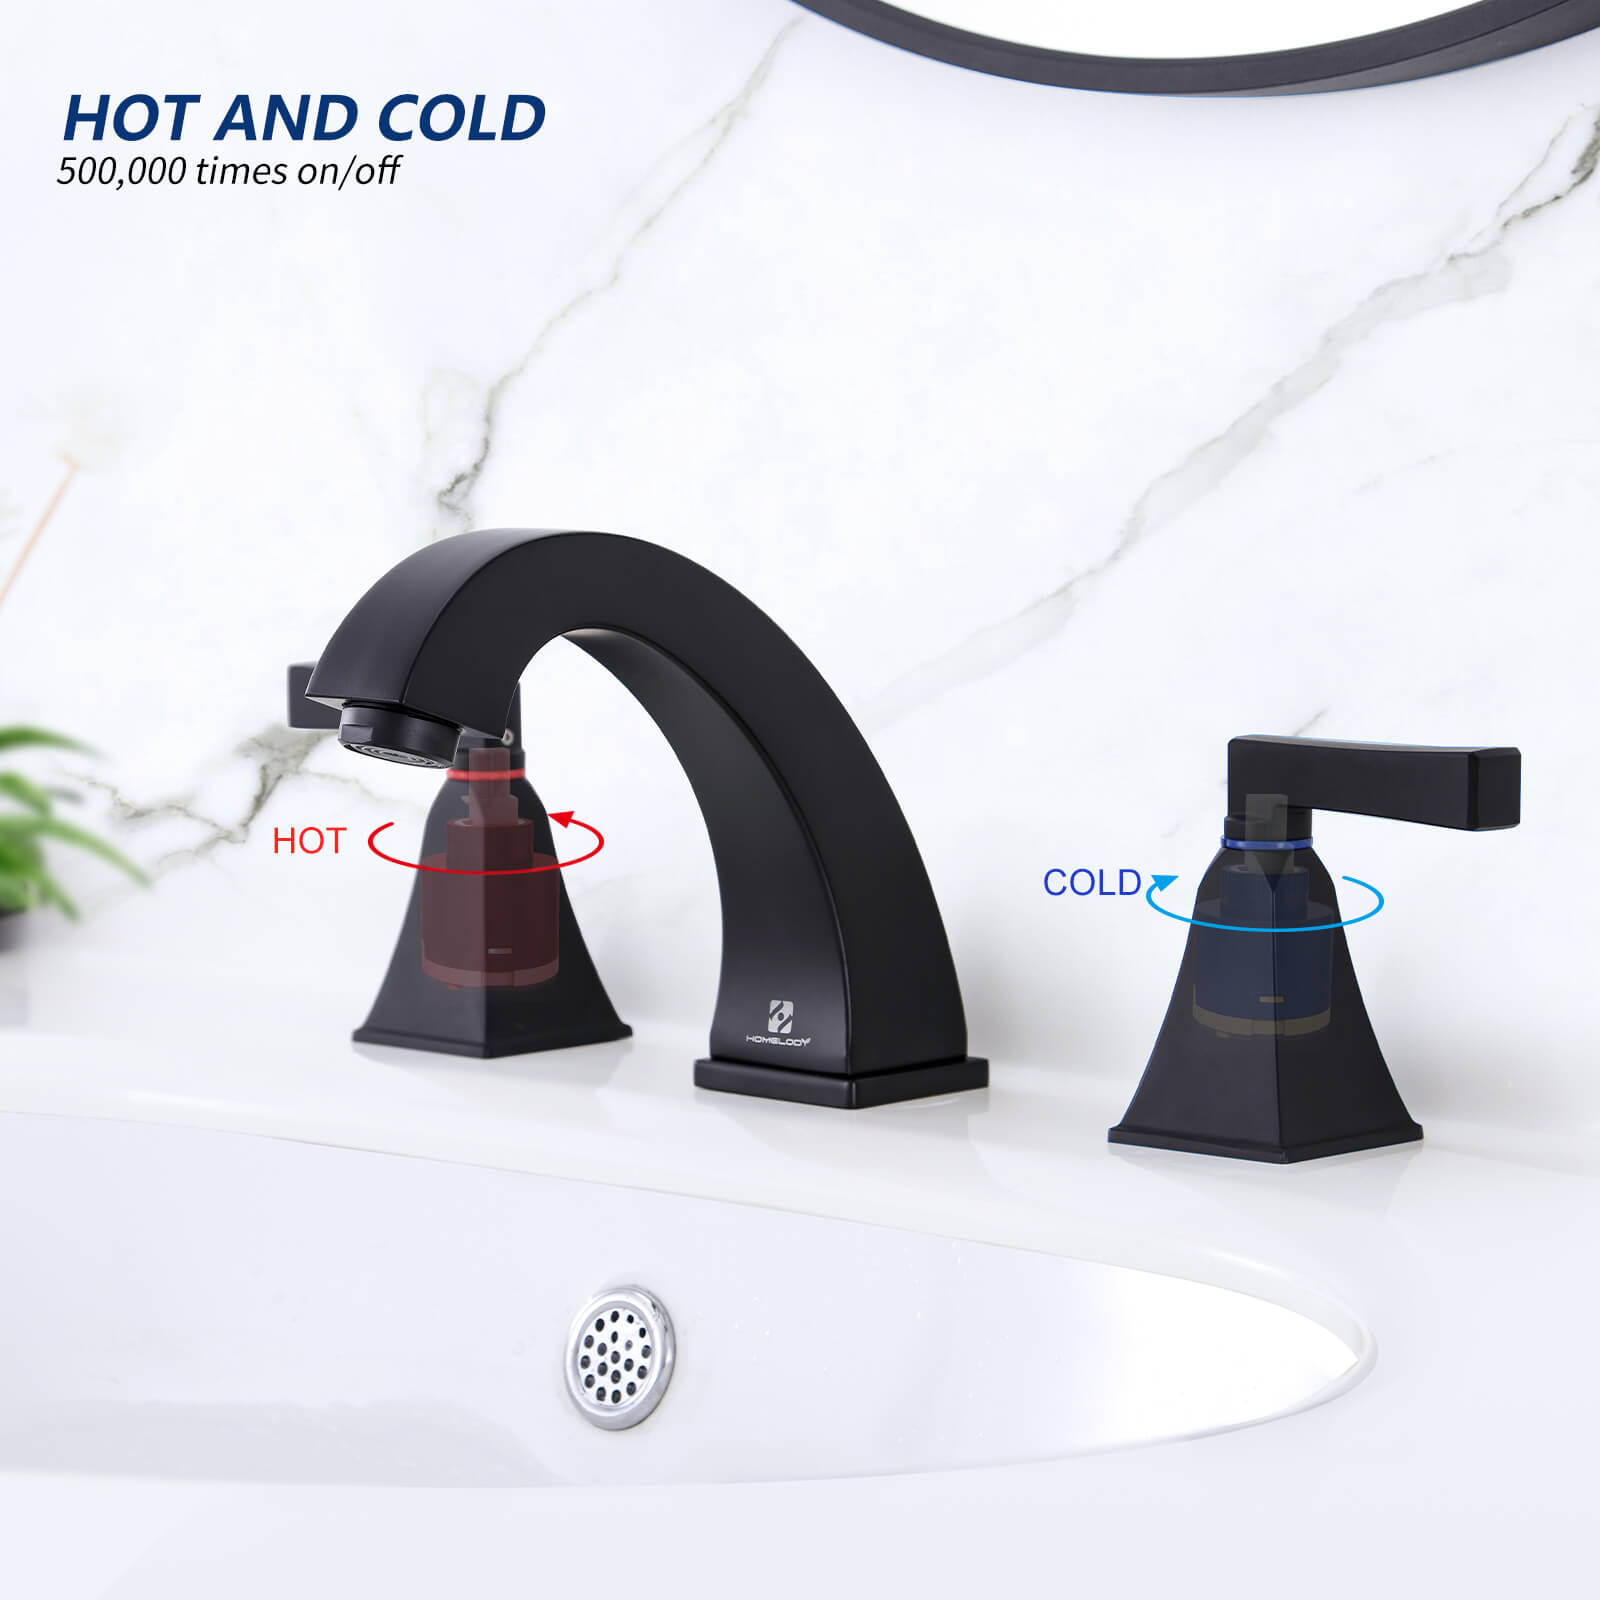 HOMELODY 8 Inch 2 Handle Bathroom Sink Faucet for 3 Hole